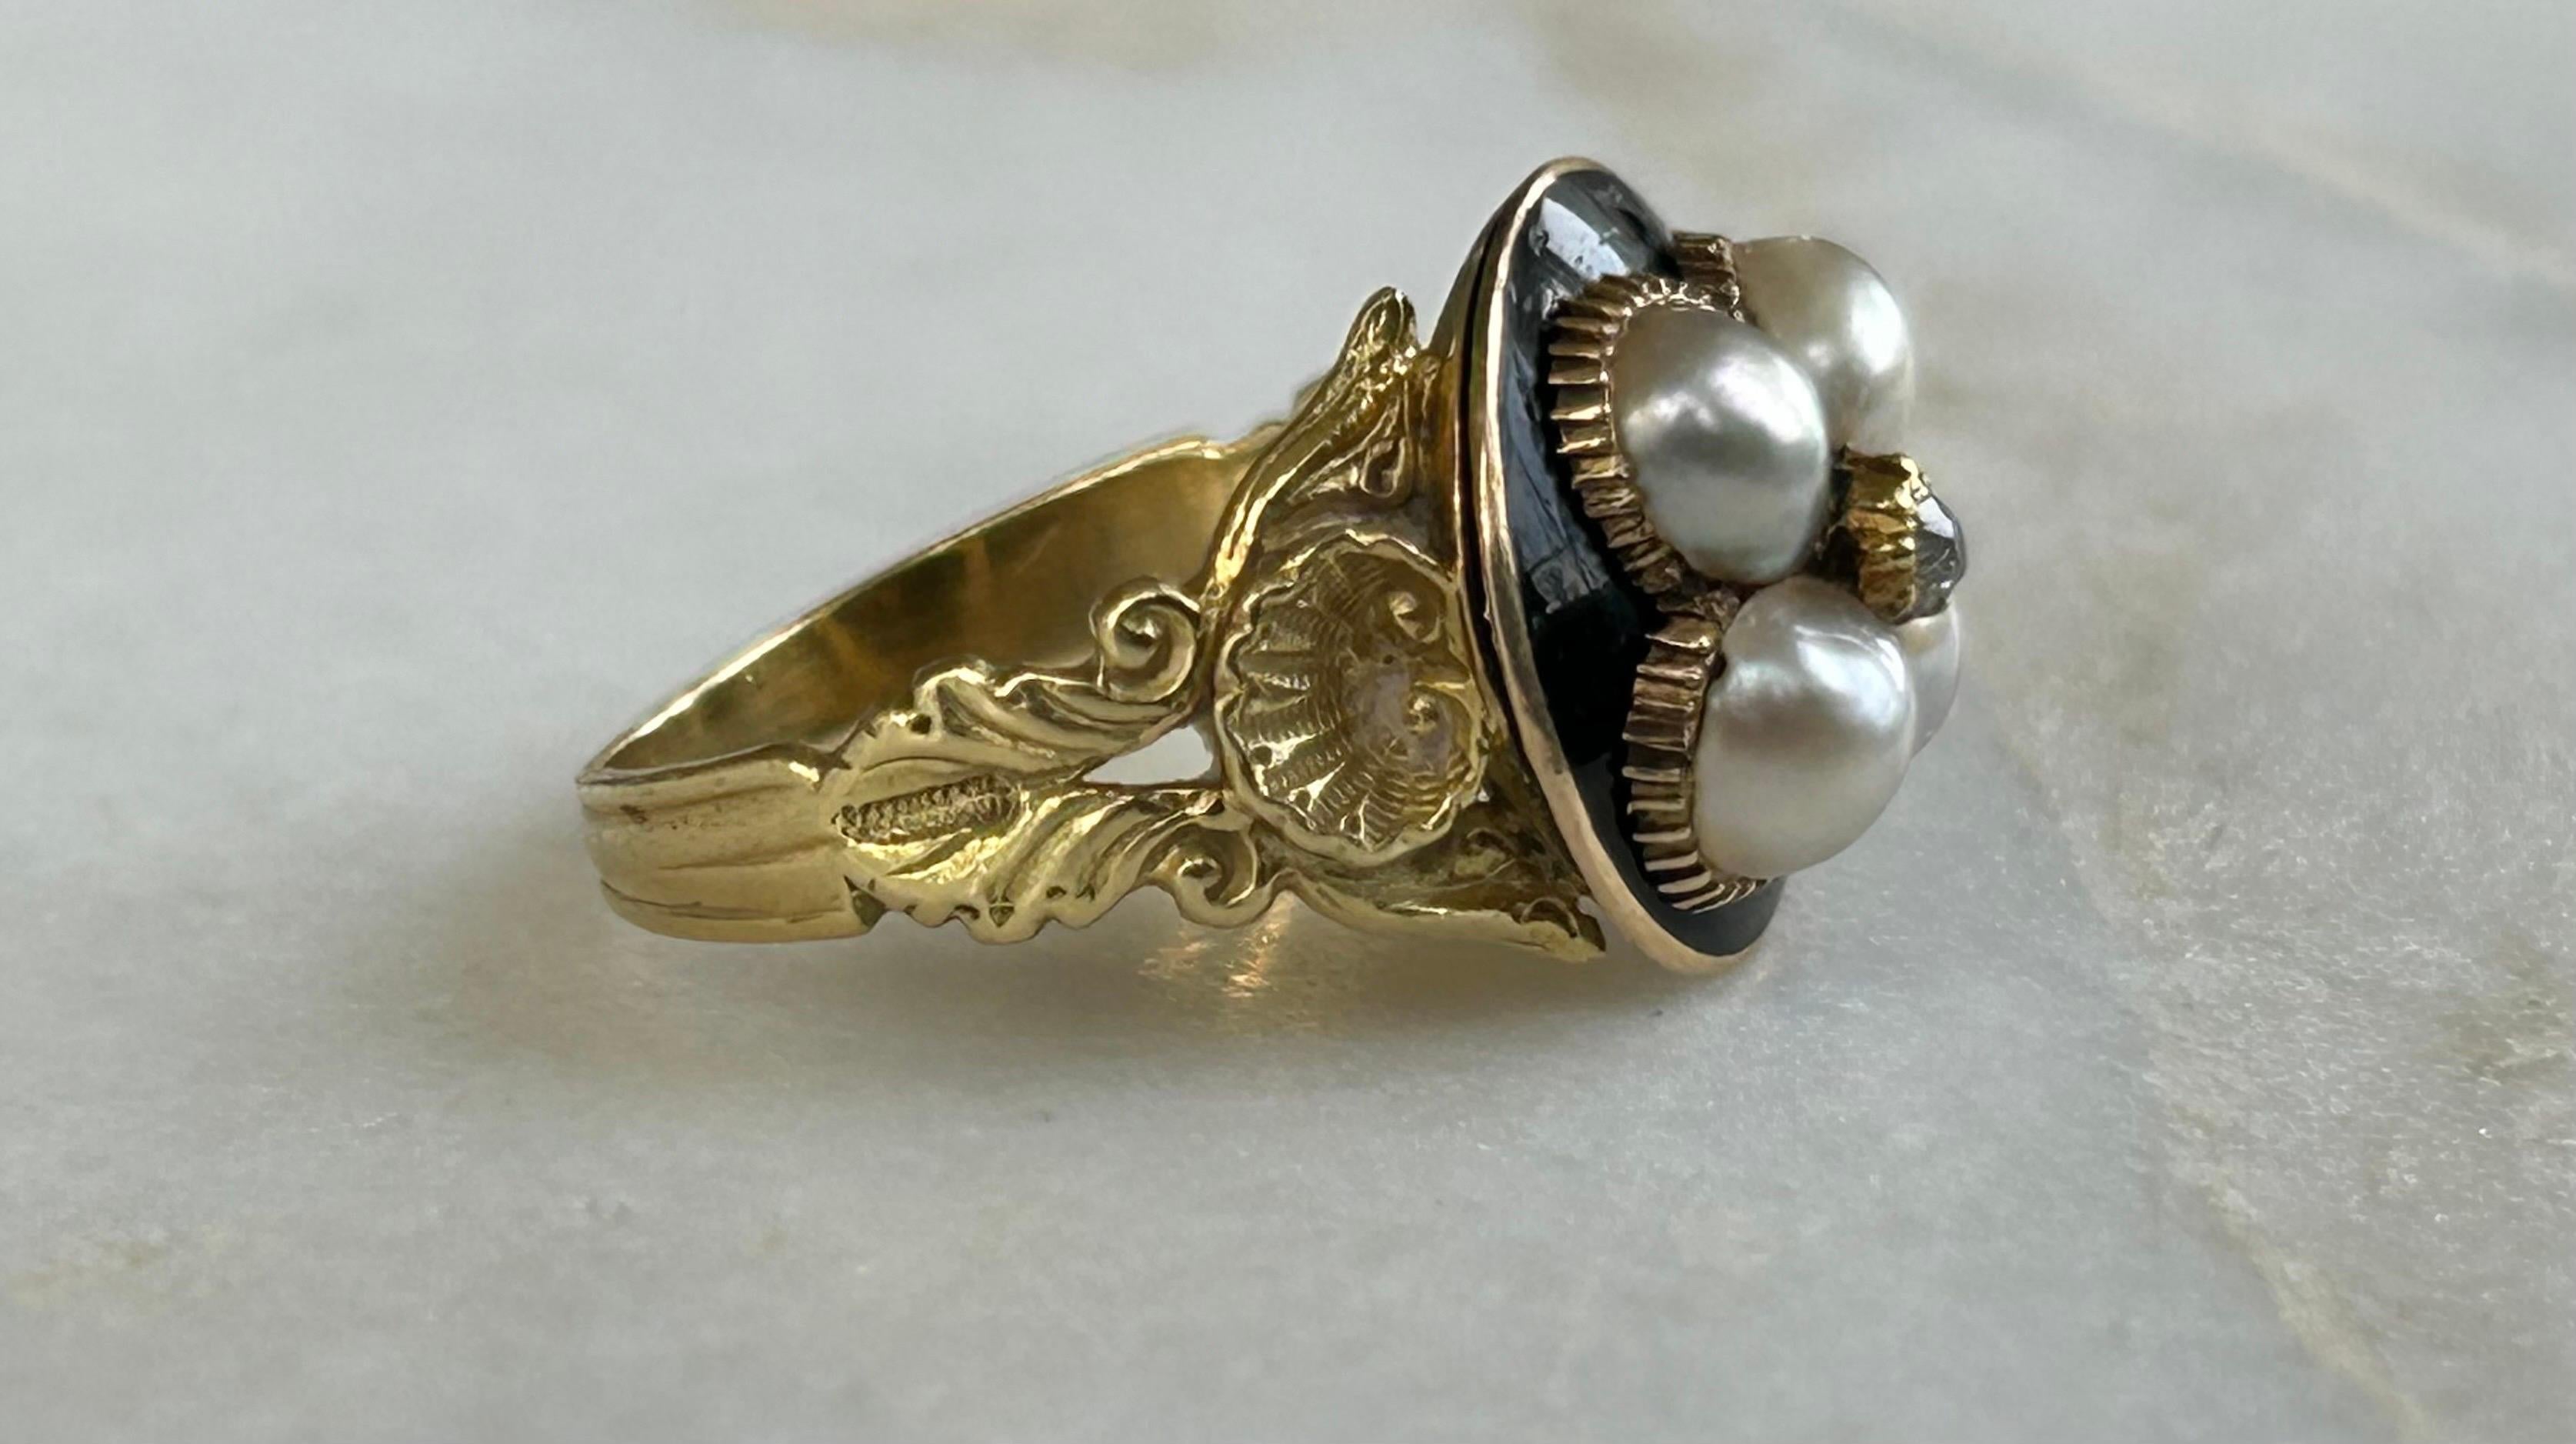 A beautiful late Georgian Natural Pearl and Enamel set mourning ring, 18ct yellow gold.
The ornate, unique long and slender shank featuring a large shell and round panel ring.
Inset to top panel with four pearls of varying shades from cream, pink